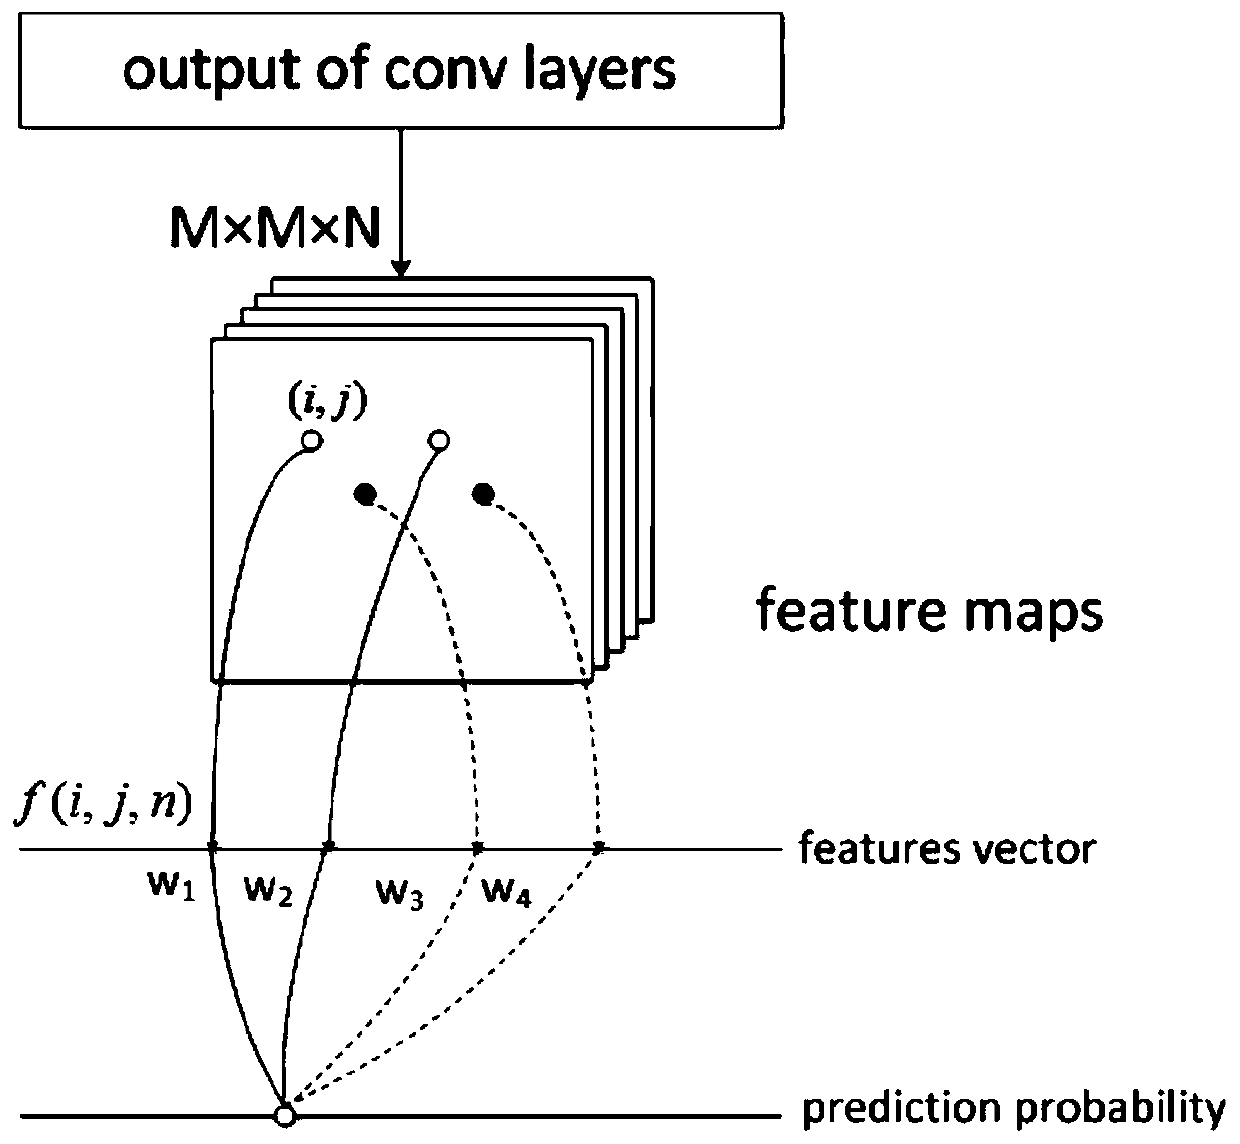 A Spatial Information Learning Method Based on Artificial Neural Network